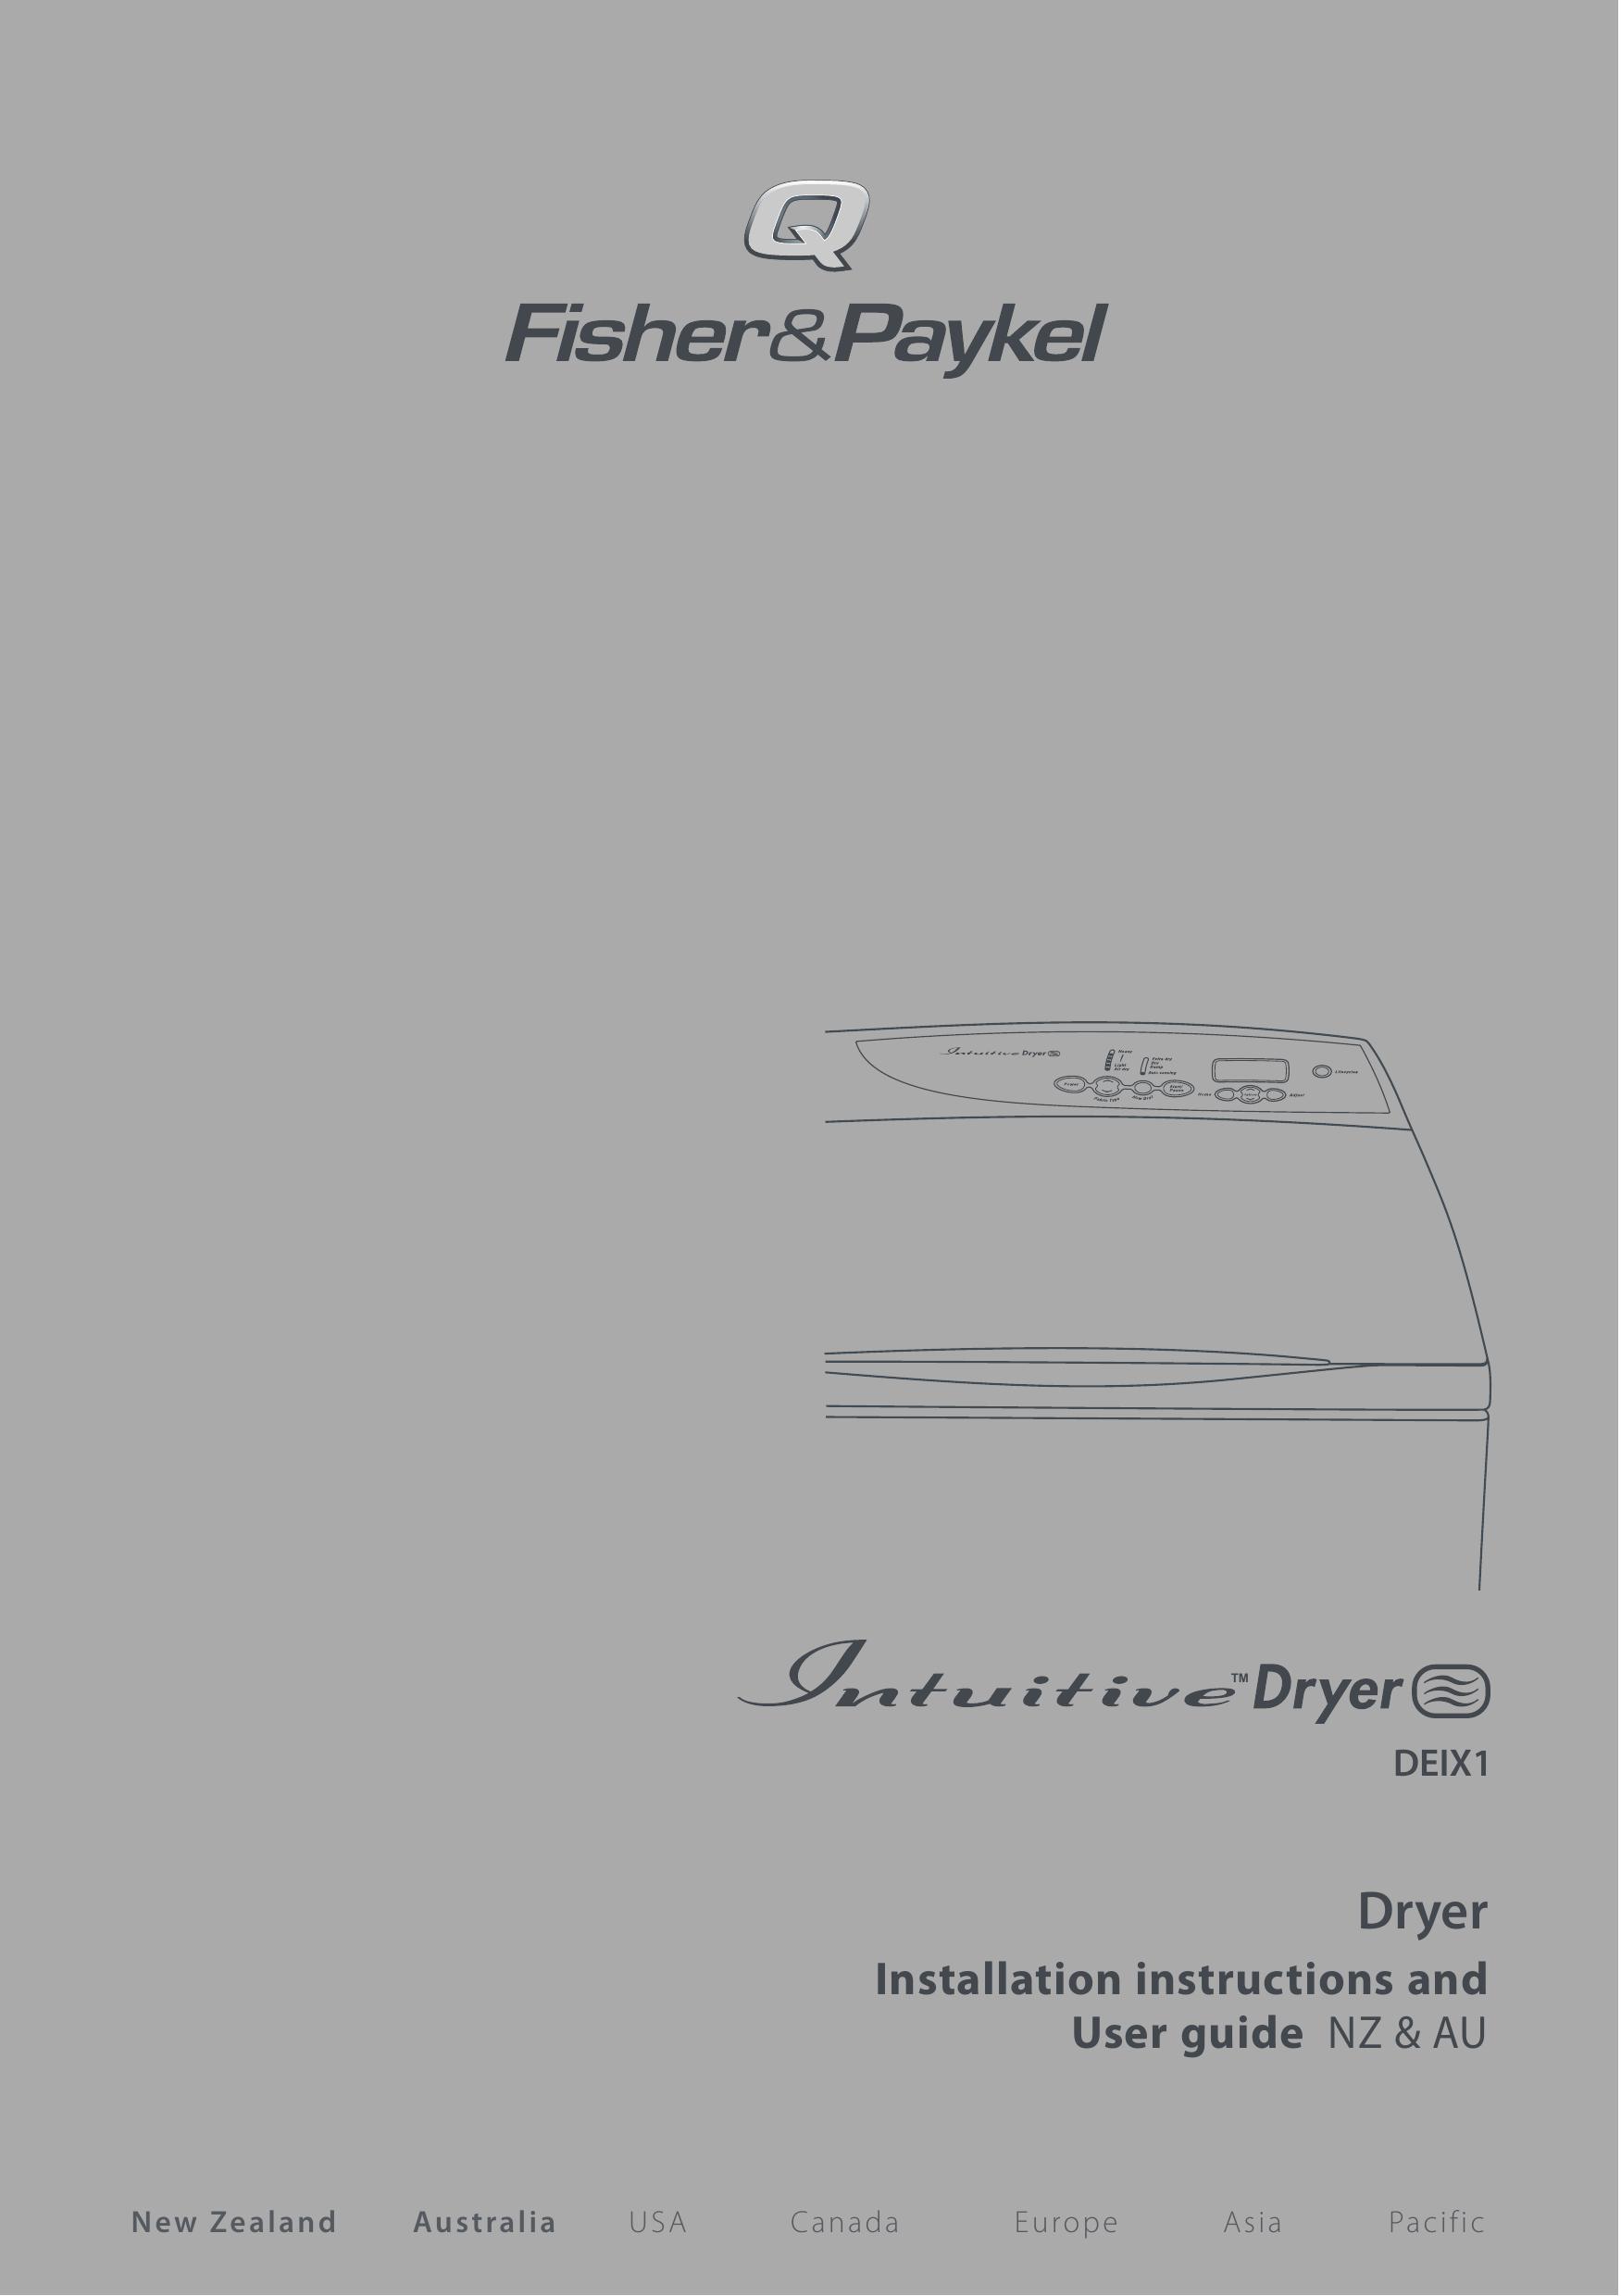 Fisher & Paykel DEIX1 Clothes Dryer User Manual